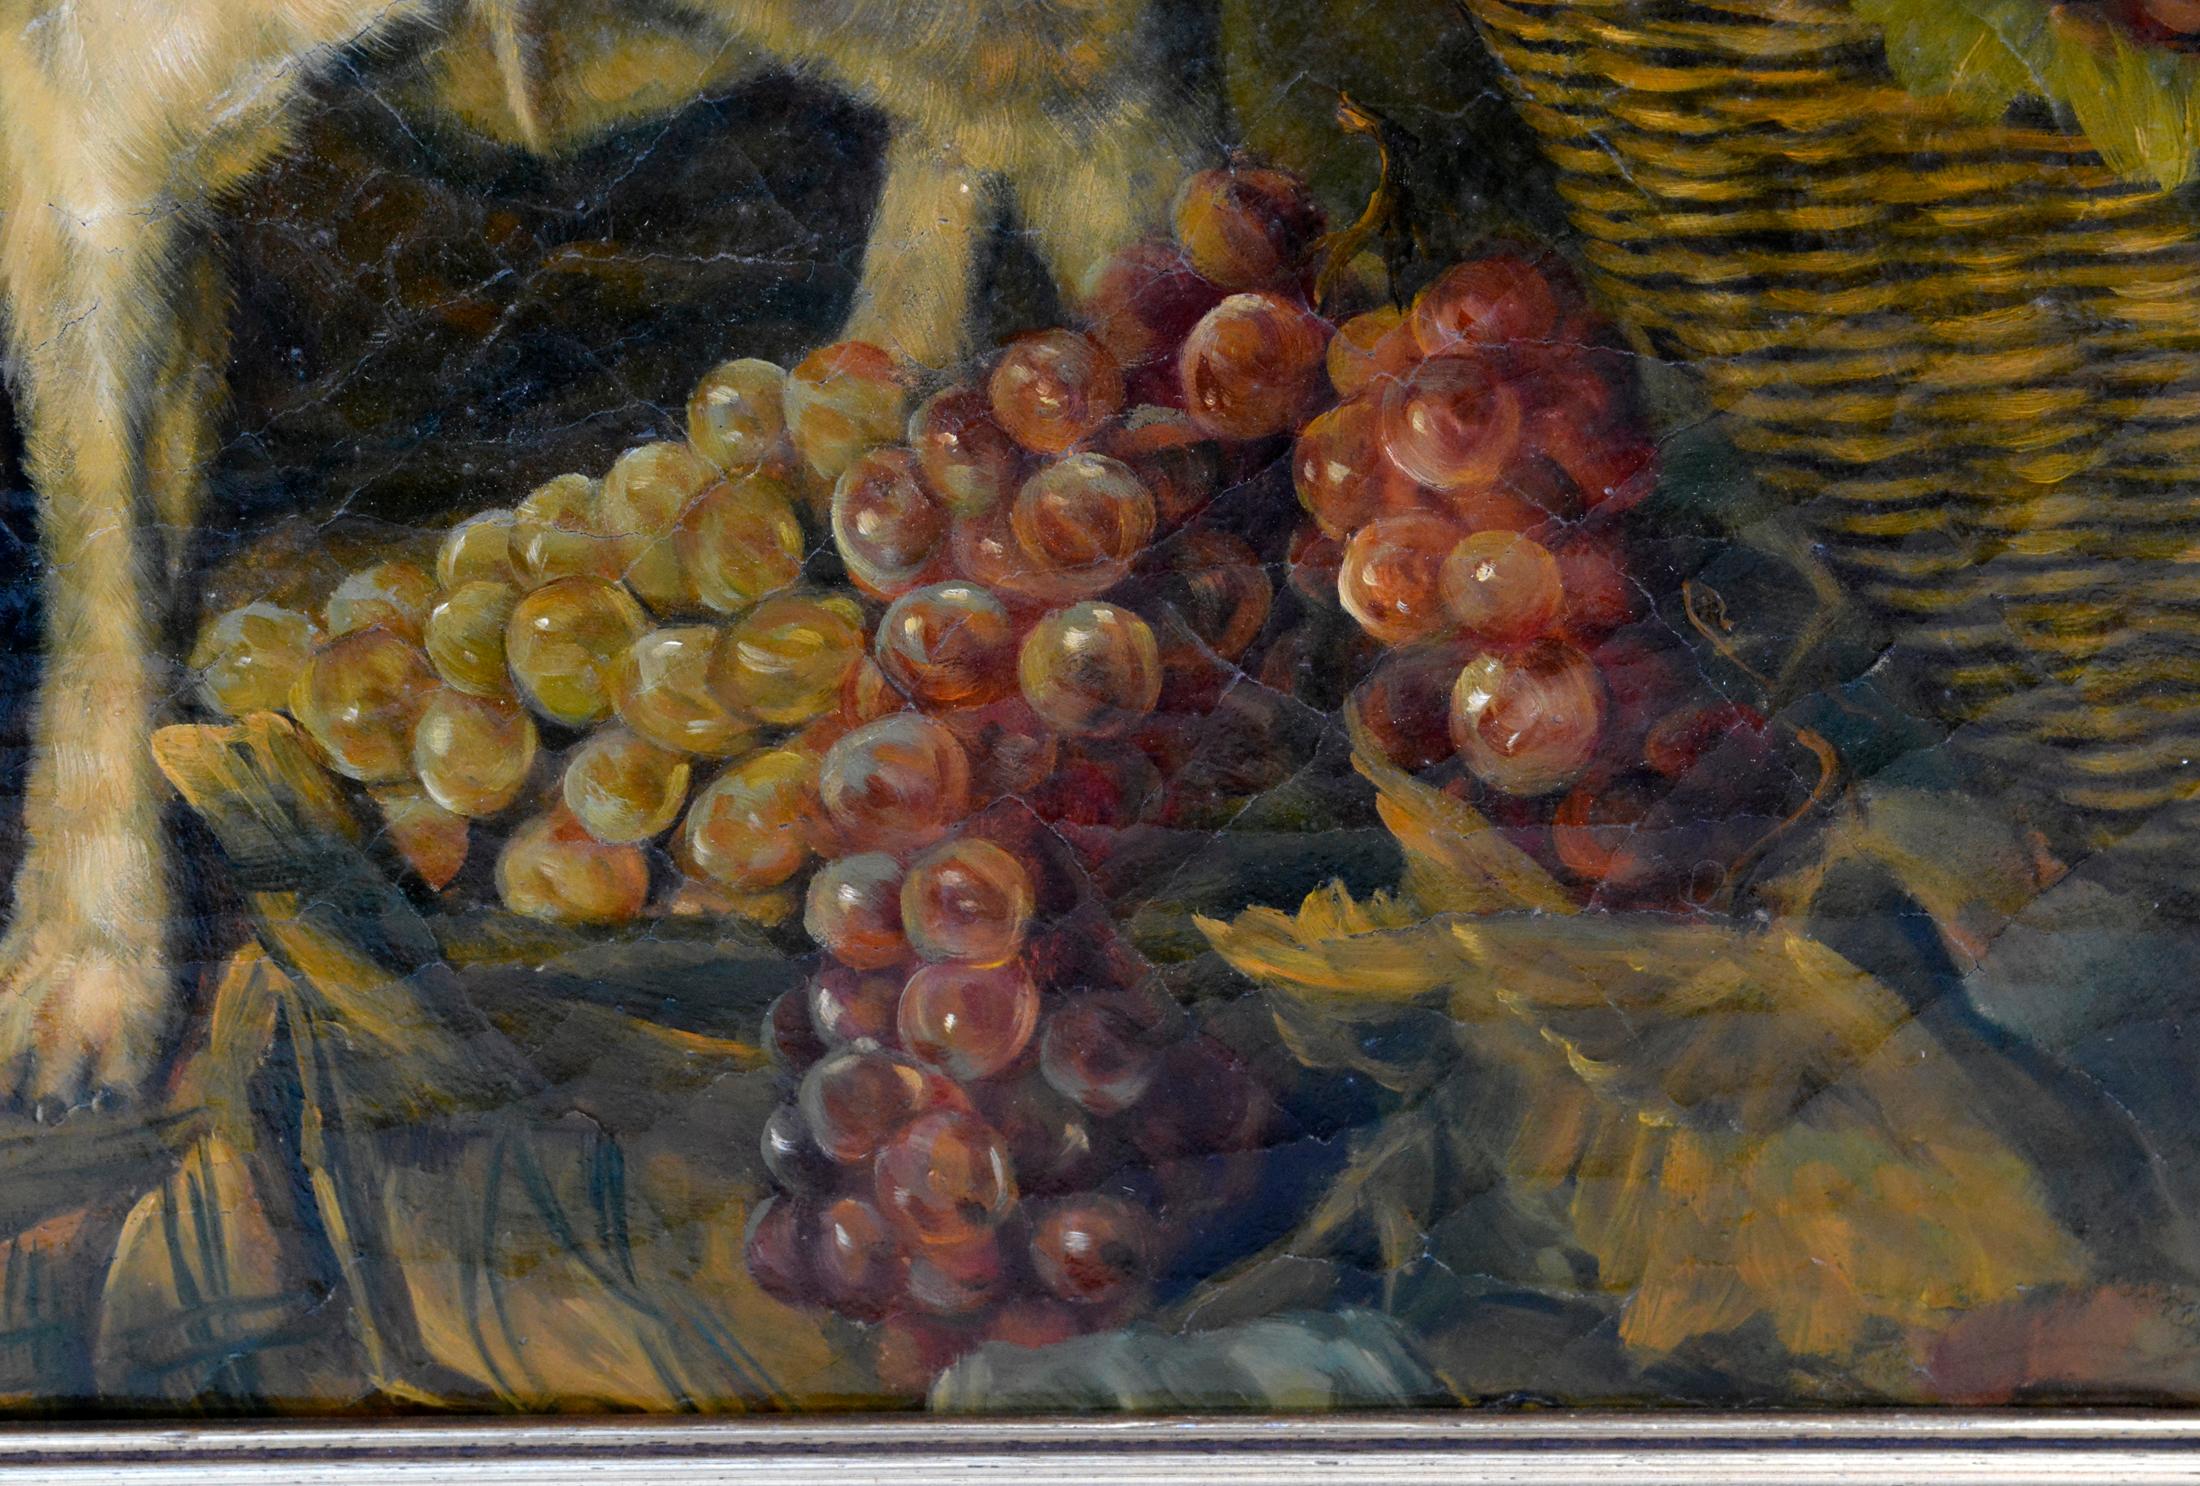 Oil on wooden panel, with fine craquelé, 1840s

Very beautiful and expressive representation of a spitz guarding a basket of grapes. The Austrian painter Ferdinand Georg Waldmüller created the model for this painting in 1836 under the title 